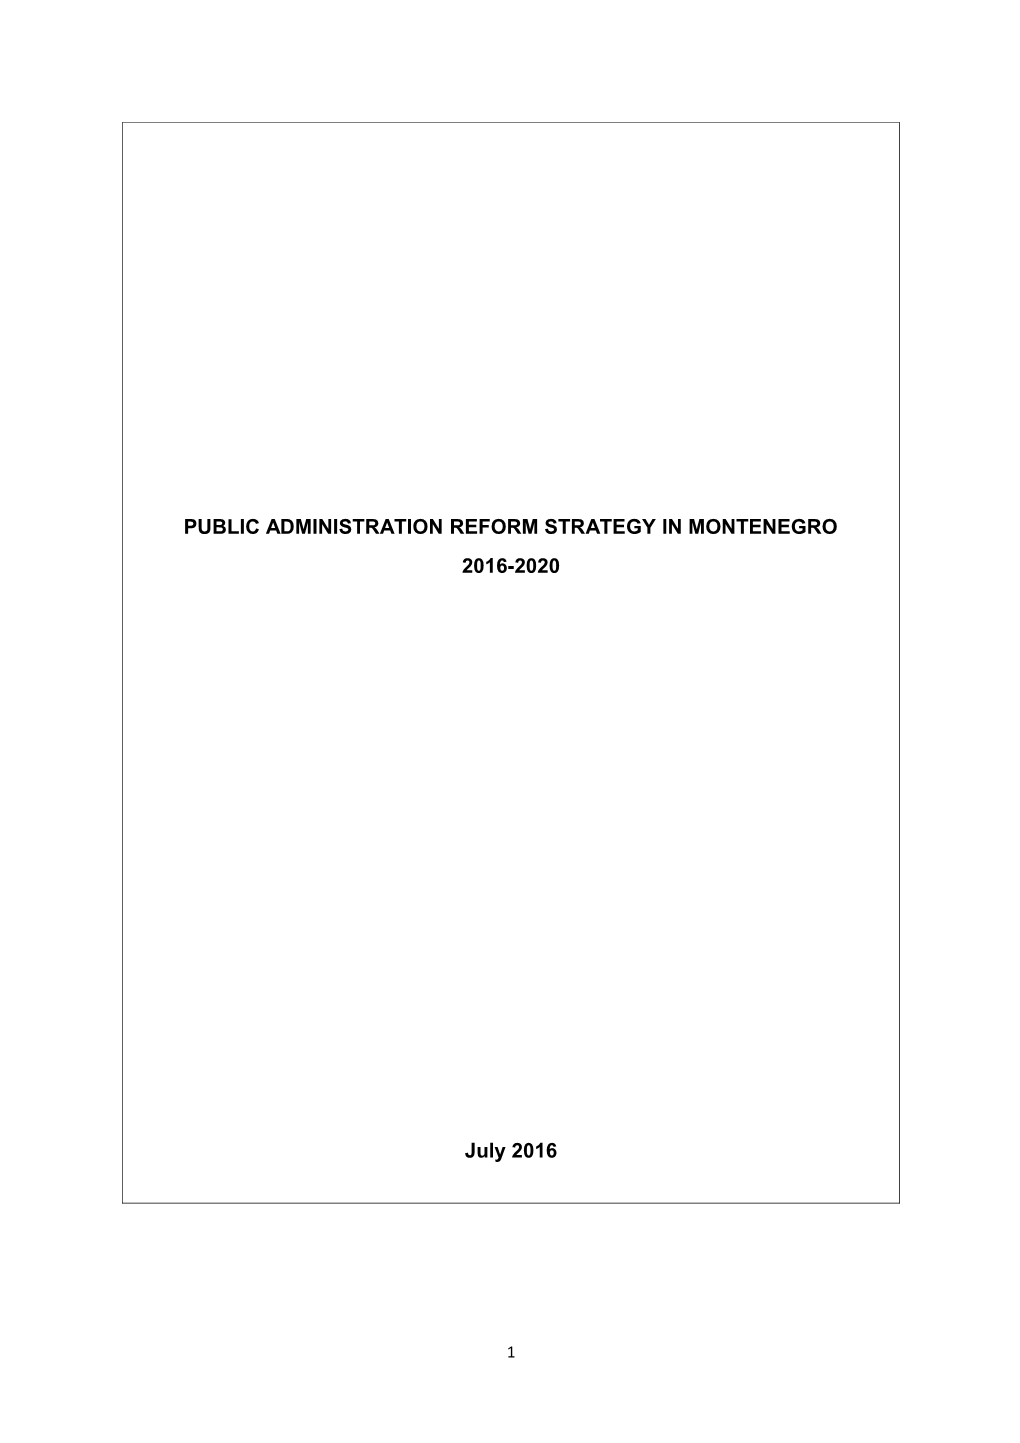 Public Administration Reform Strategy in Montenegro